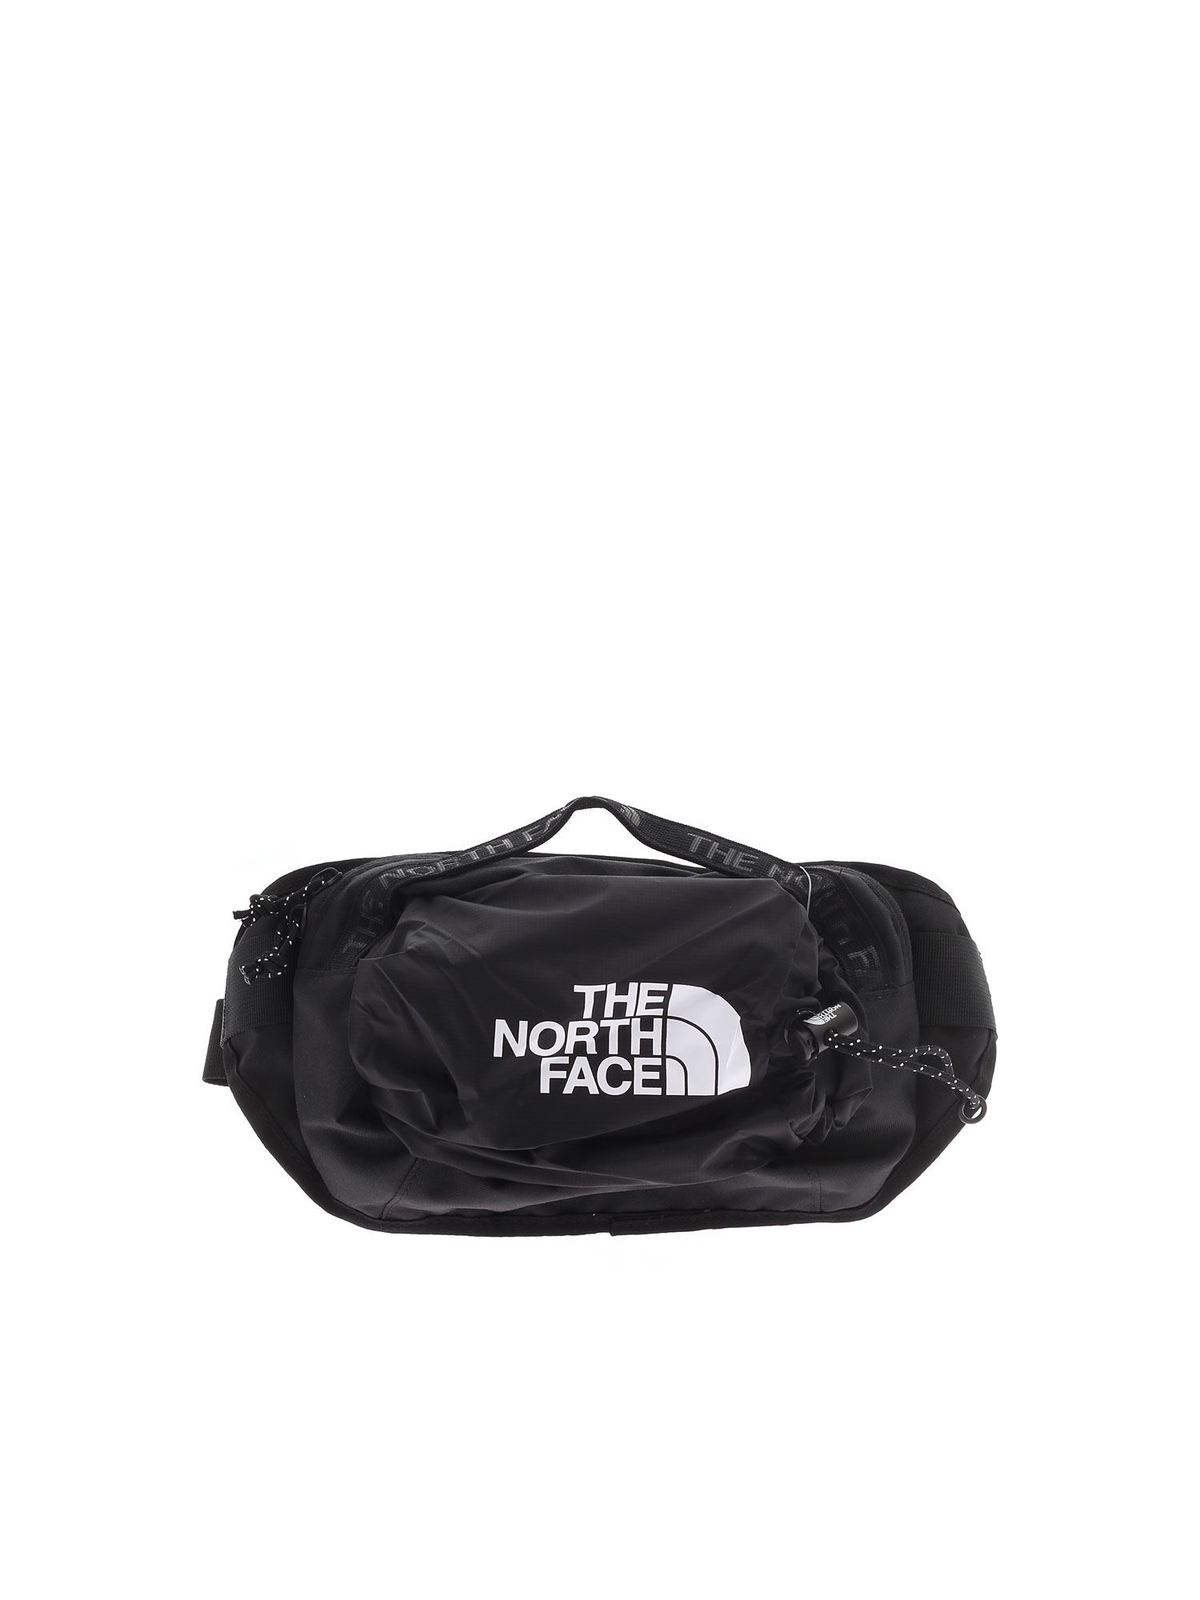 The North Face Bags BOZER HIP PACK III BELT BAG IN BLACK